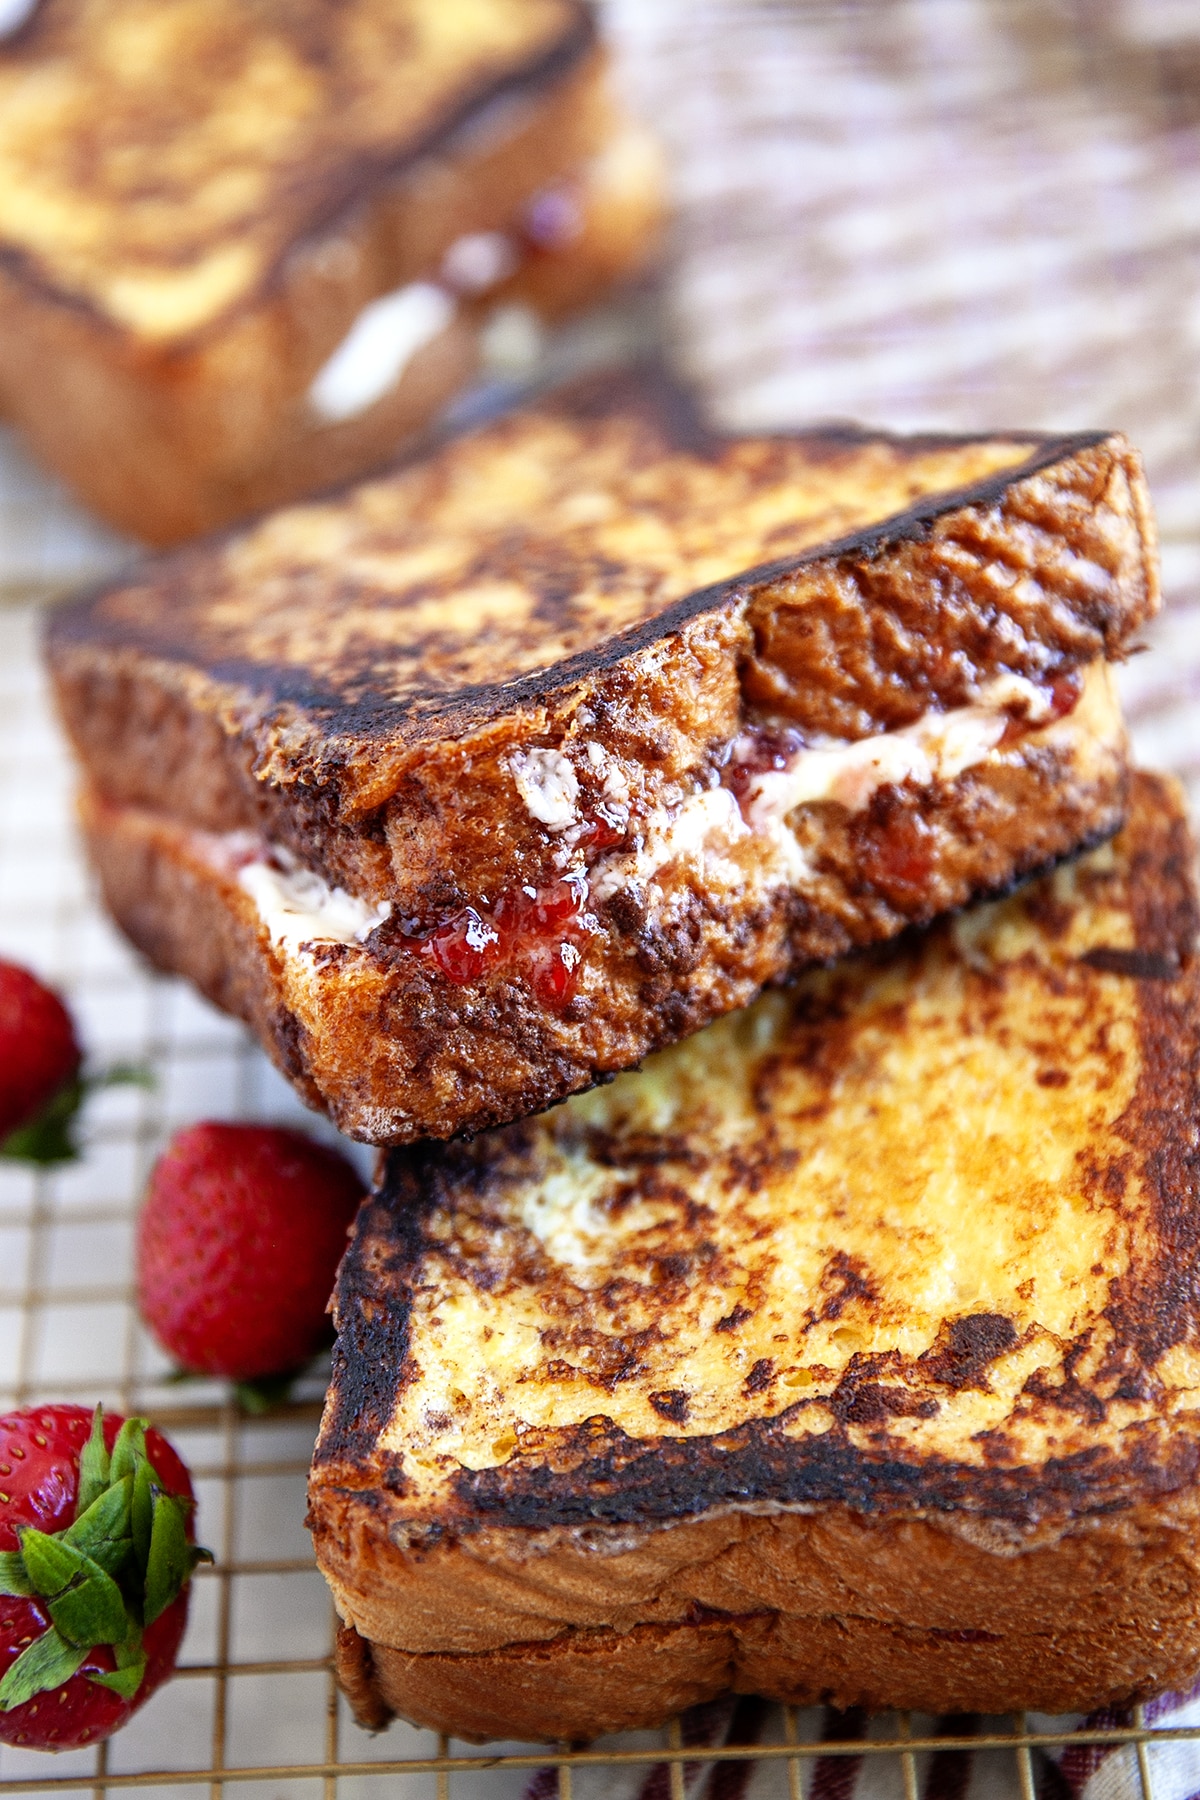 Showing the edge of just cooked stuffed French toast. 